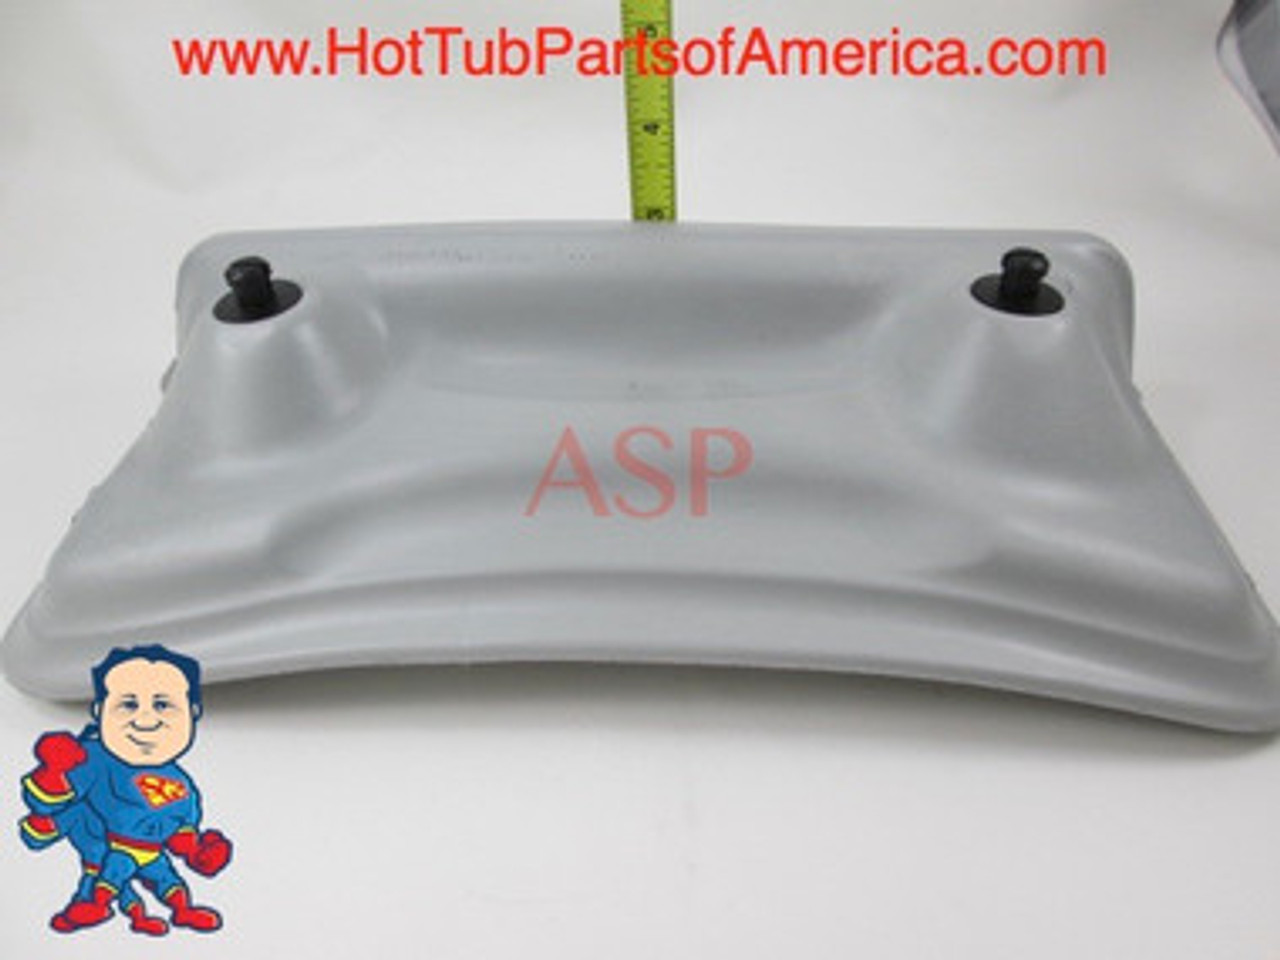 Artesian Resort Spa Hot Tub Neck Pillow Gray Dual Pin Head Rest How To Video